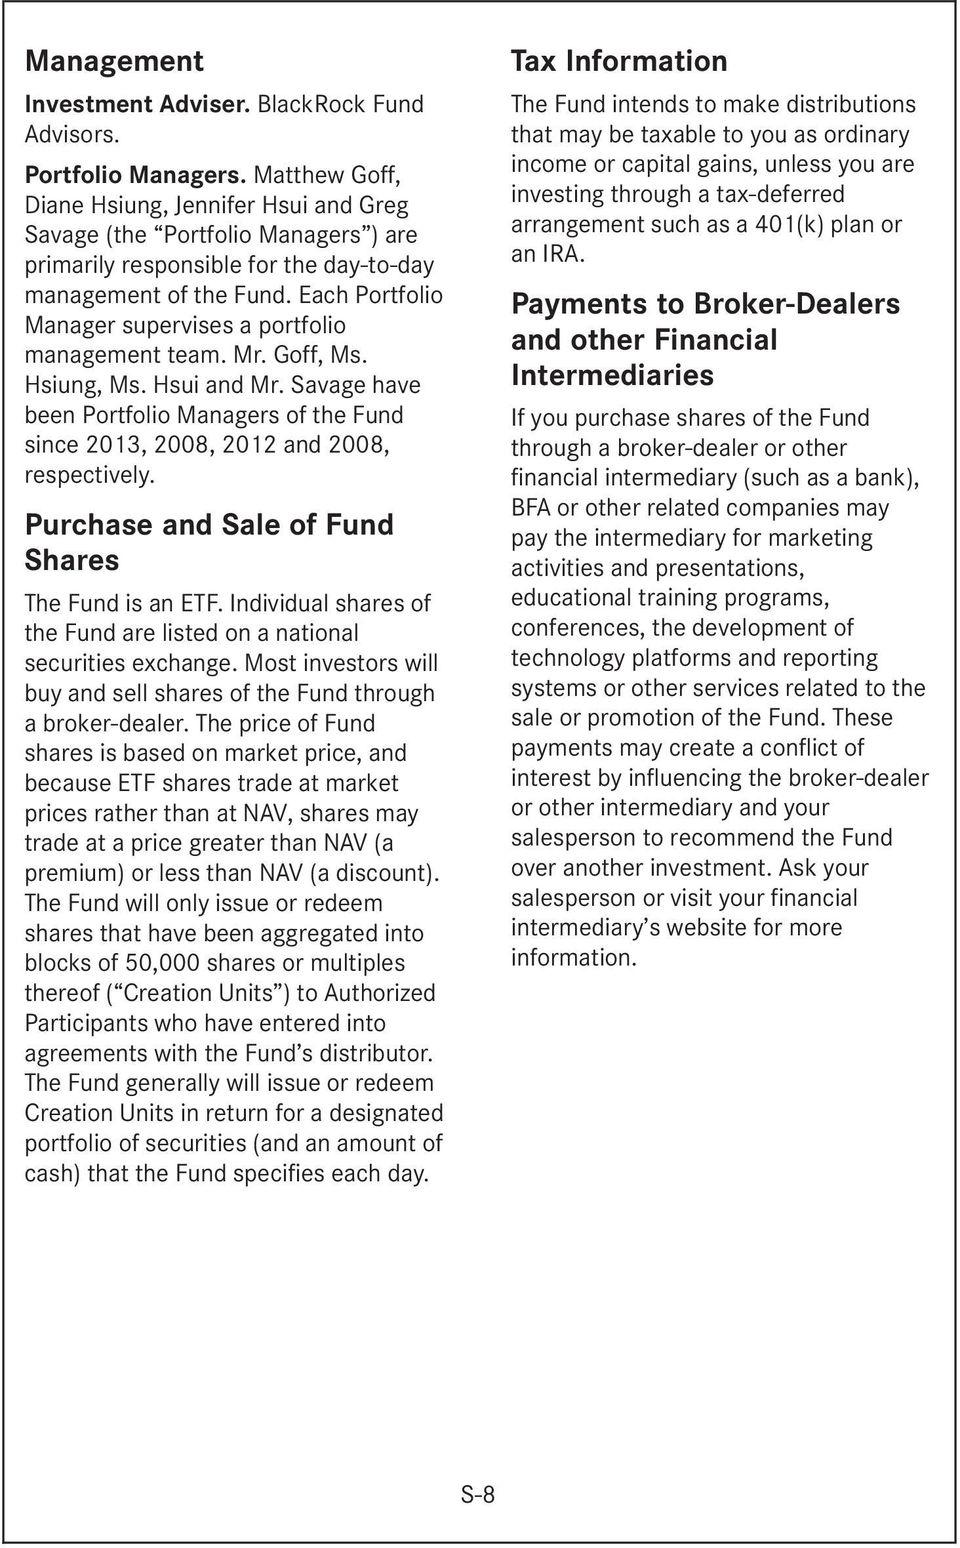 Each Portfolio Manager supervises a portfolio management team. Mr. Goff, Ms. Hsiung, Ms. Hsui and Mr. Savage have been Portfolio Managers of the Fund since 2013, 2008, 2012 and 2008, respectively.